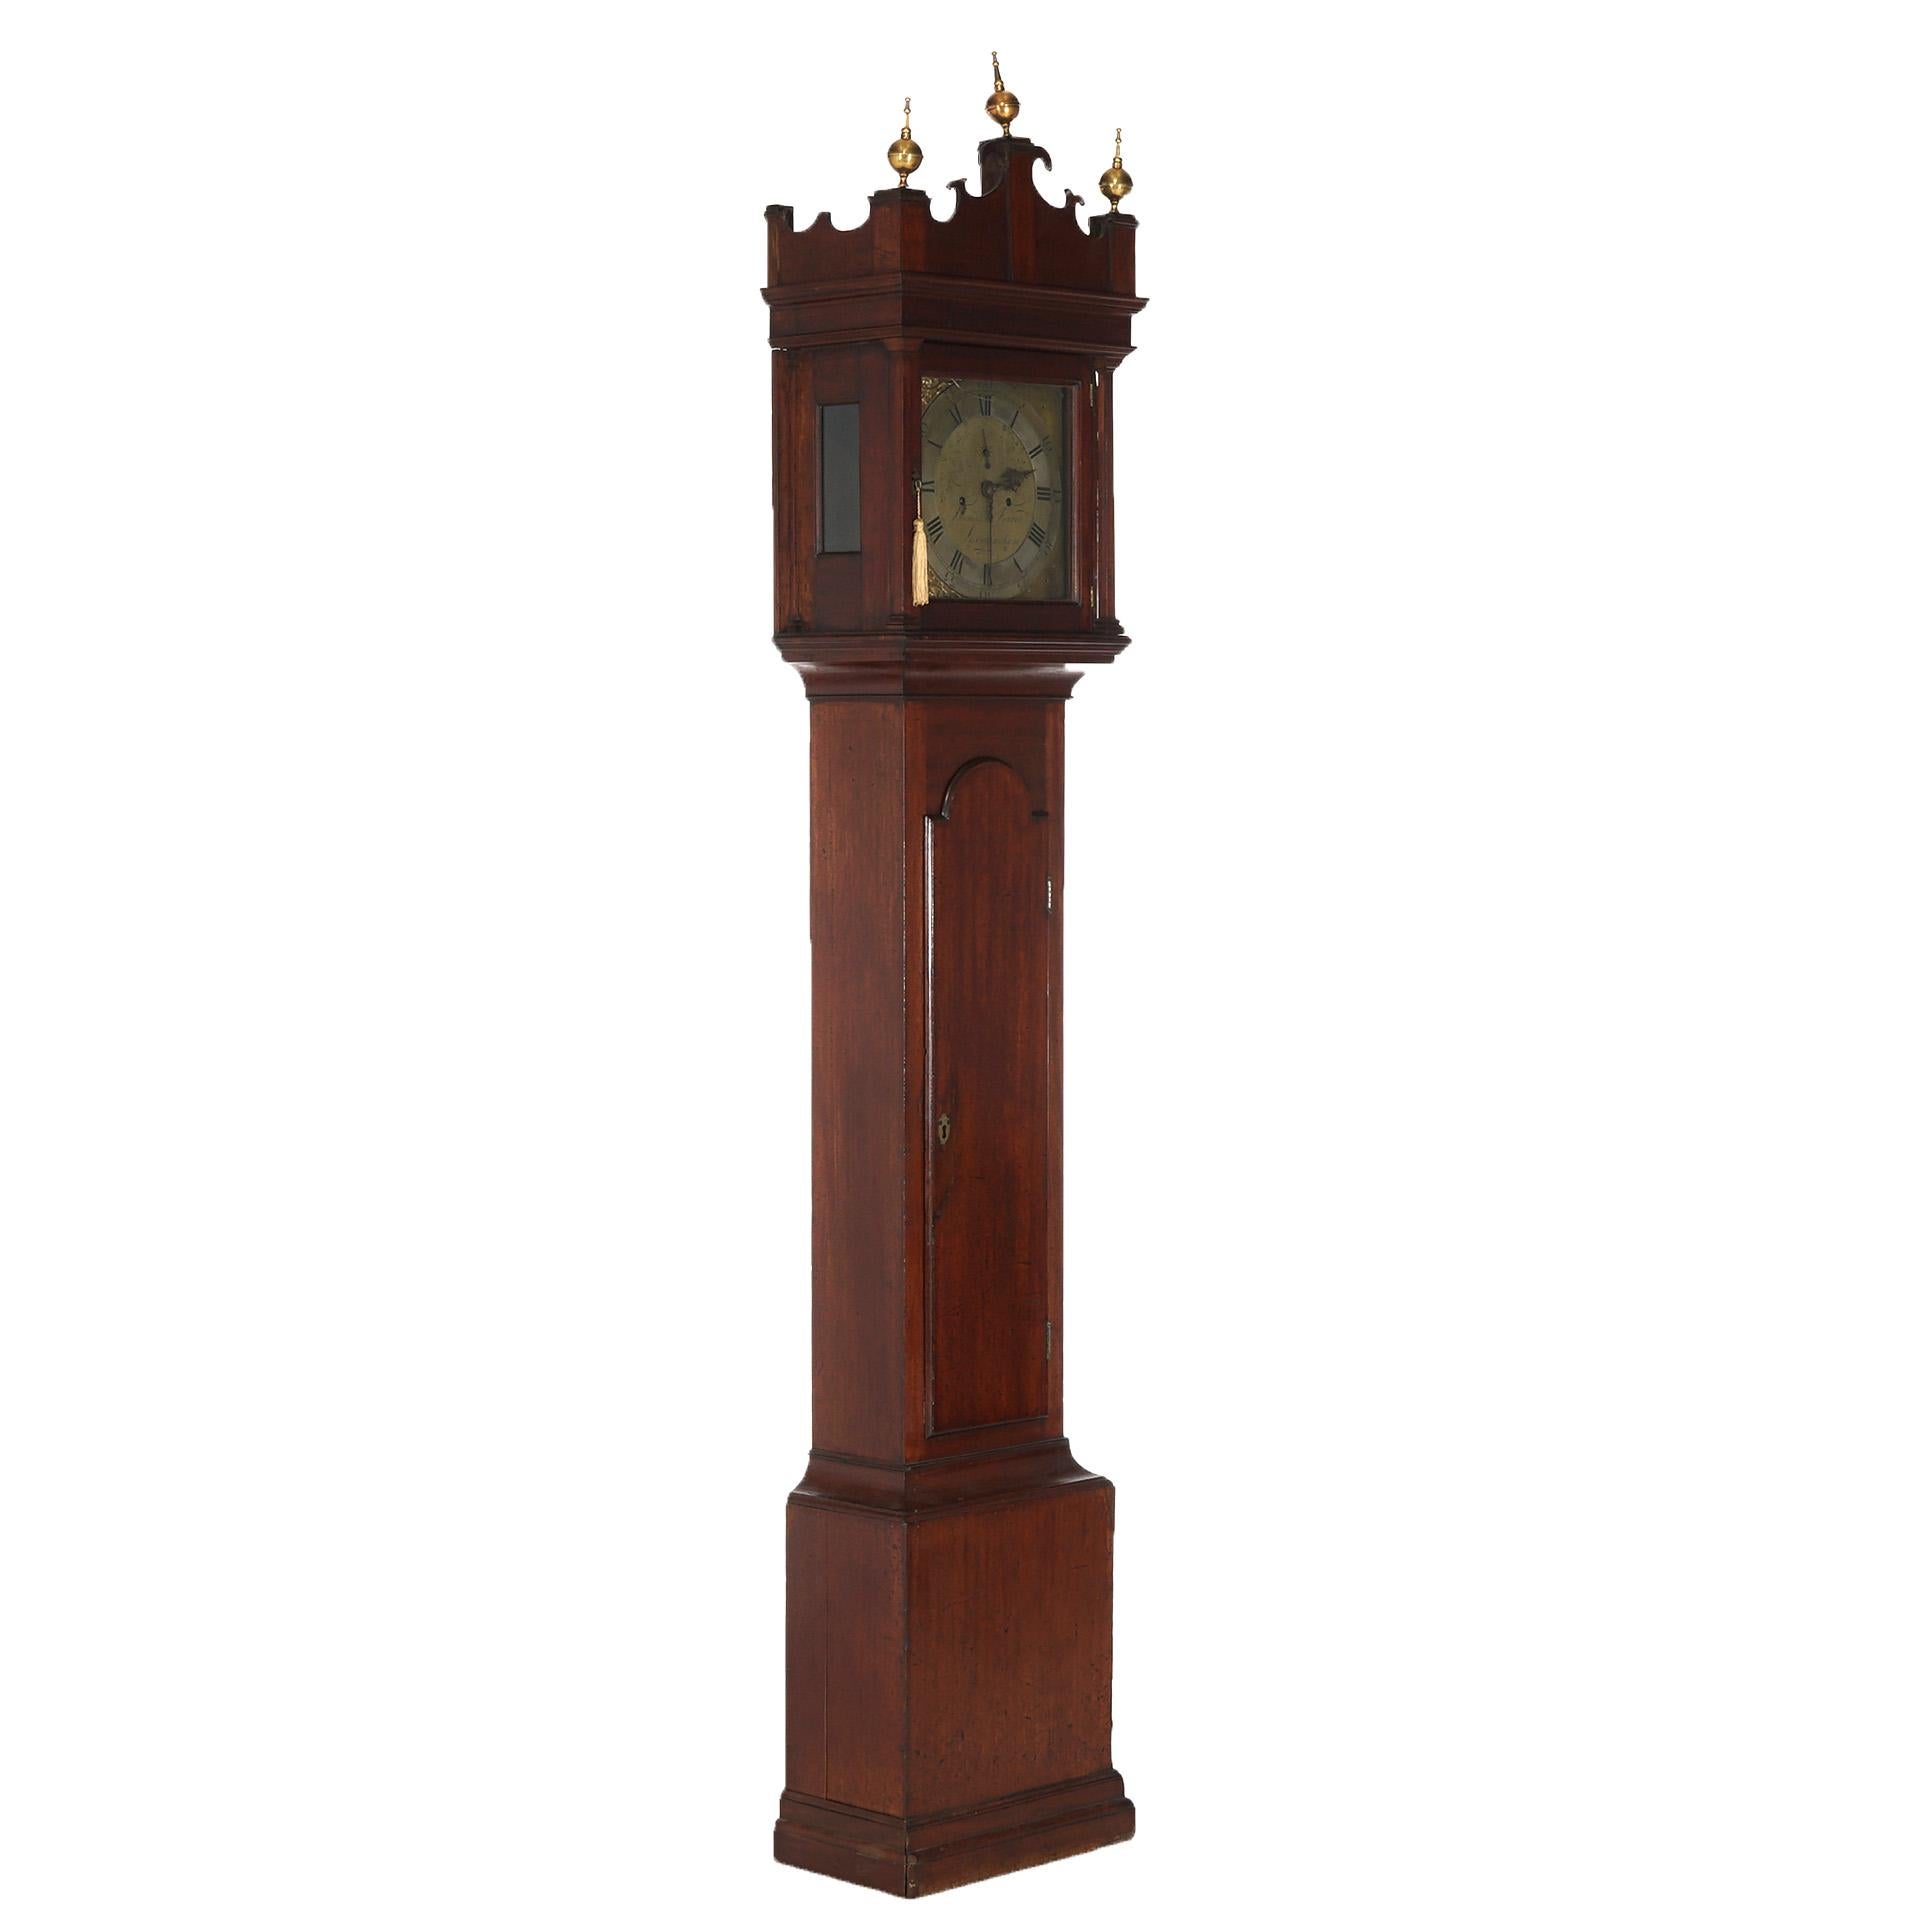 Antique Thomas Farrer Mahogany Grandfather Clock With Brass Finials 19thC For Sale 6